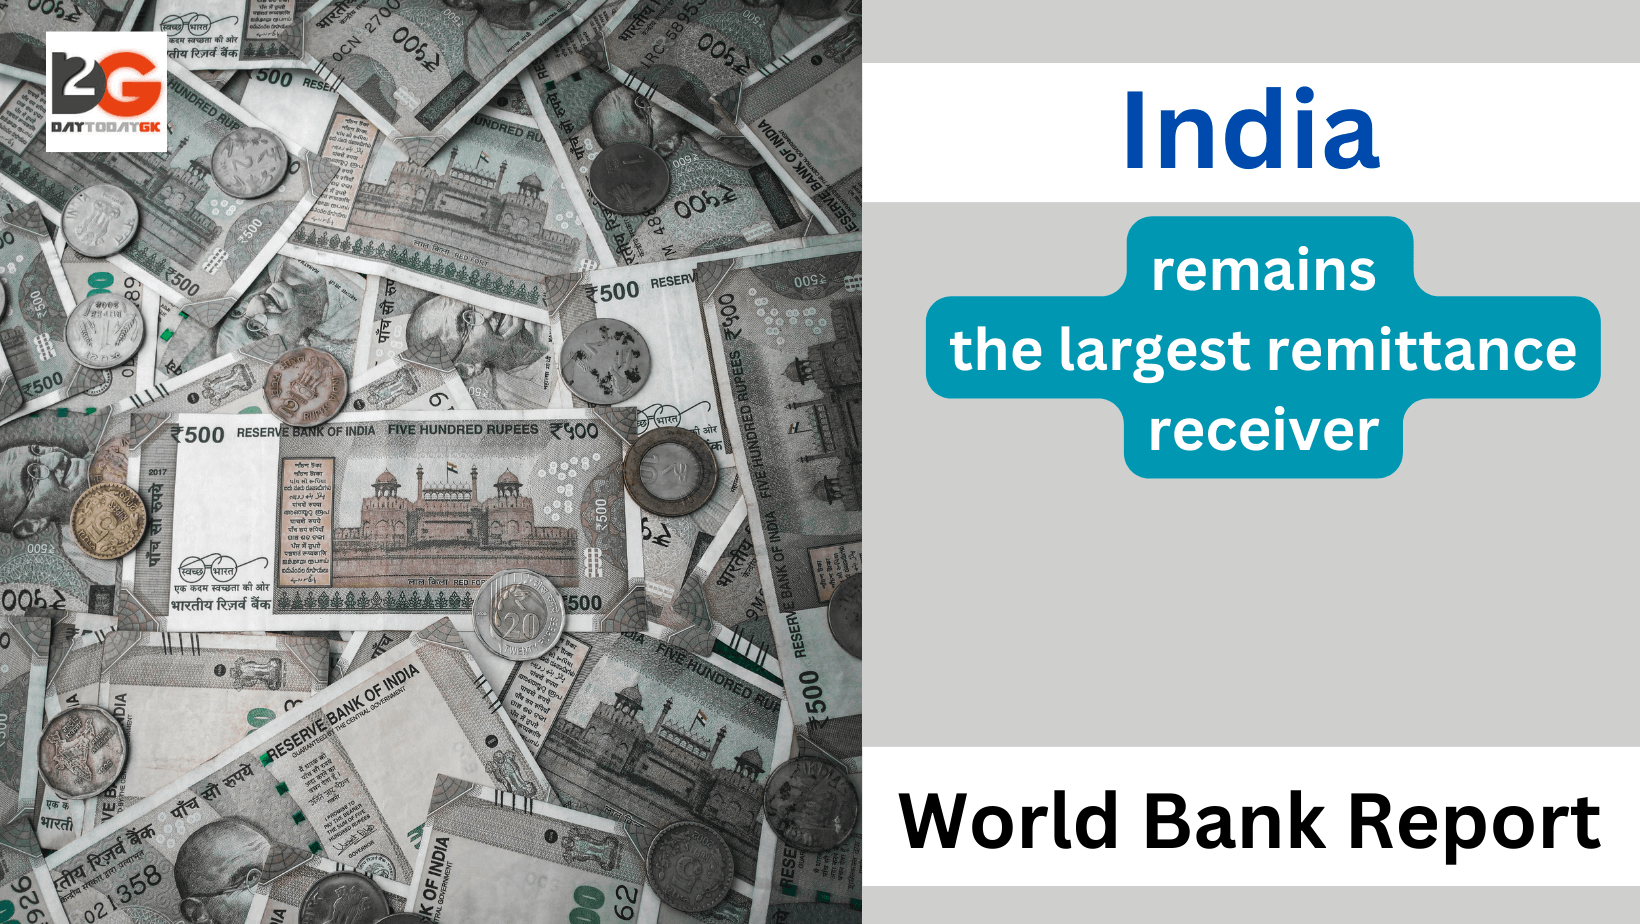 World Bank Report: India remains the largest remittance receiver